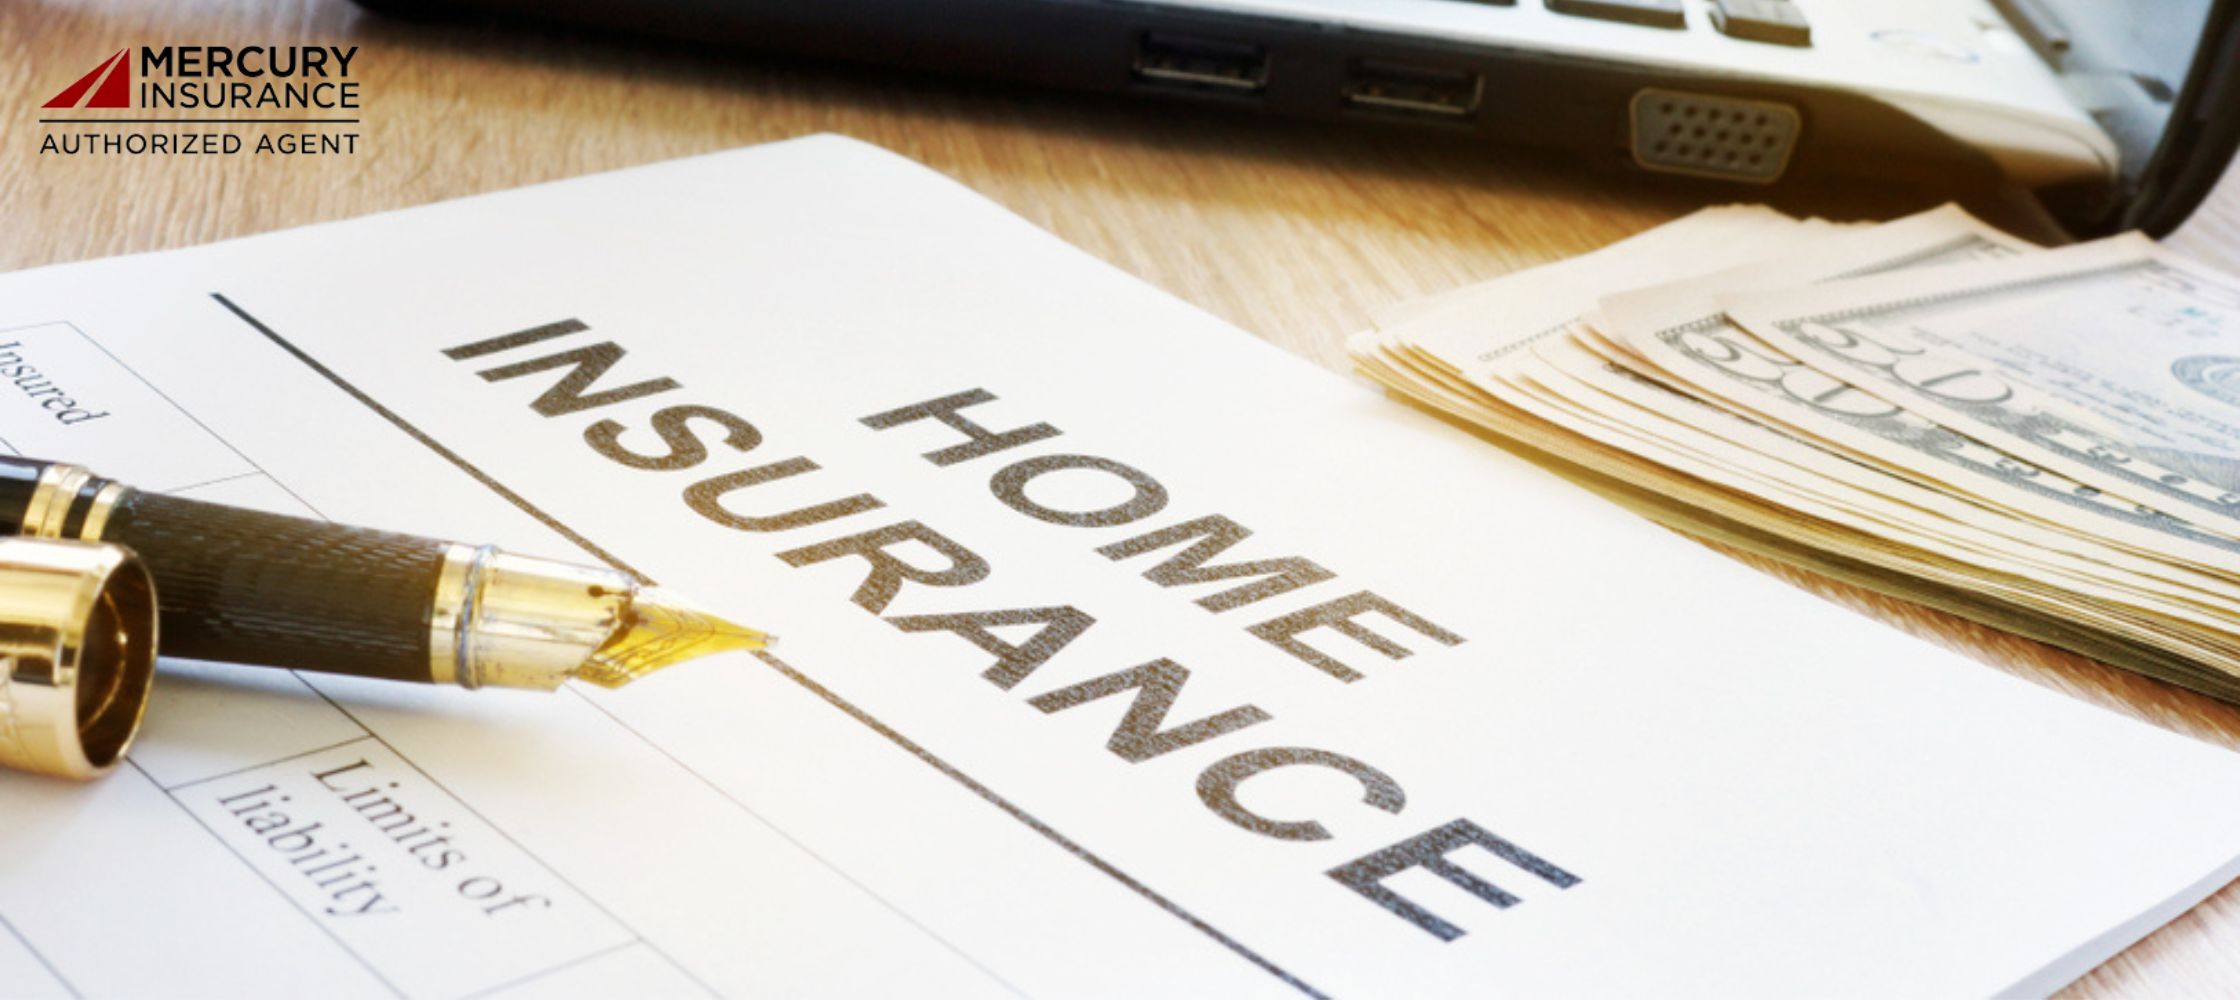 Insightful Homeowners Insurance Guide for the First-Timers